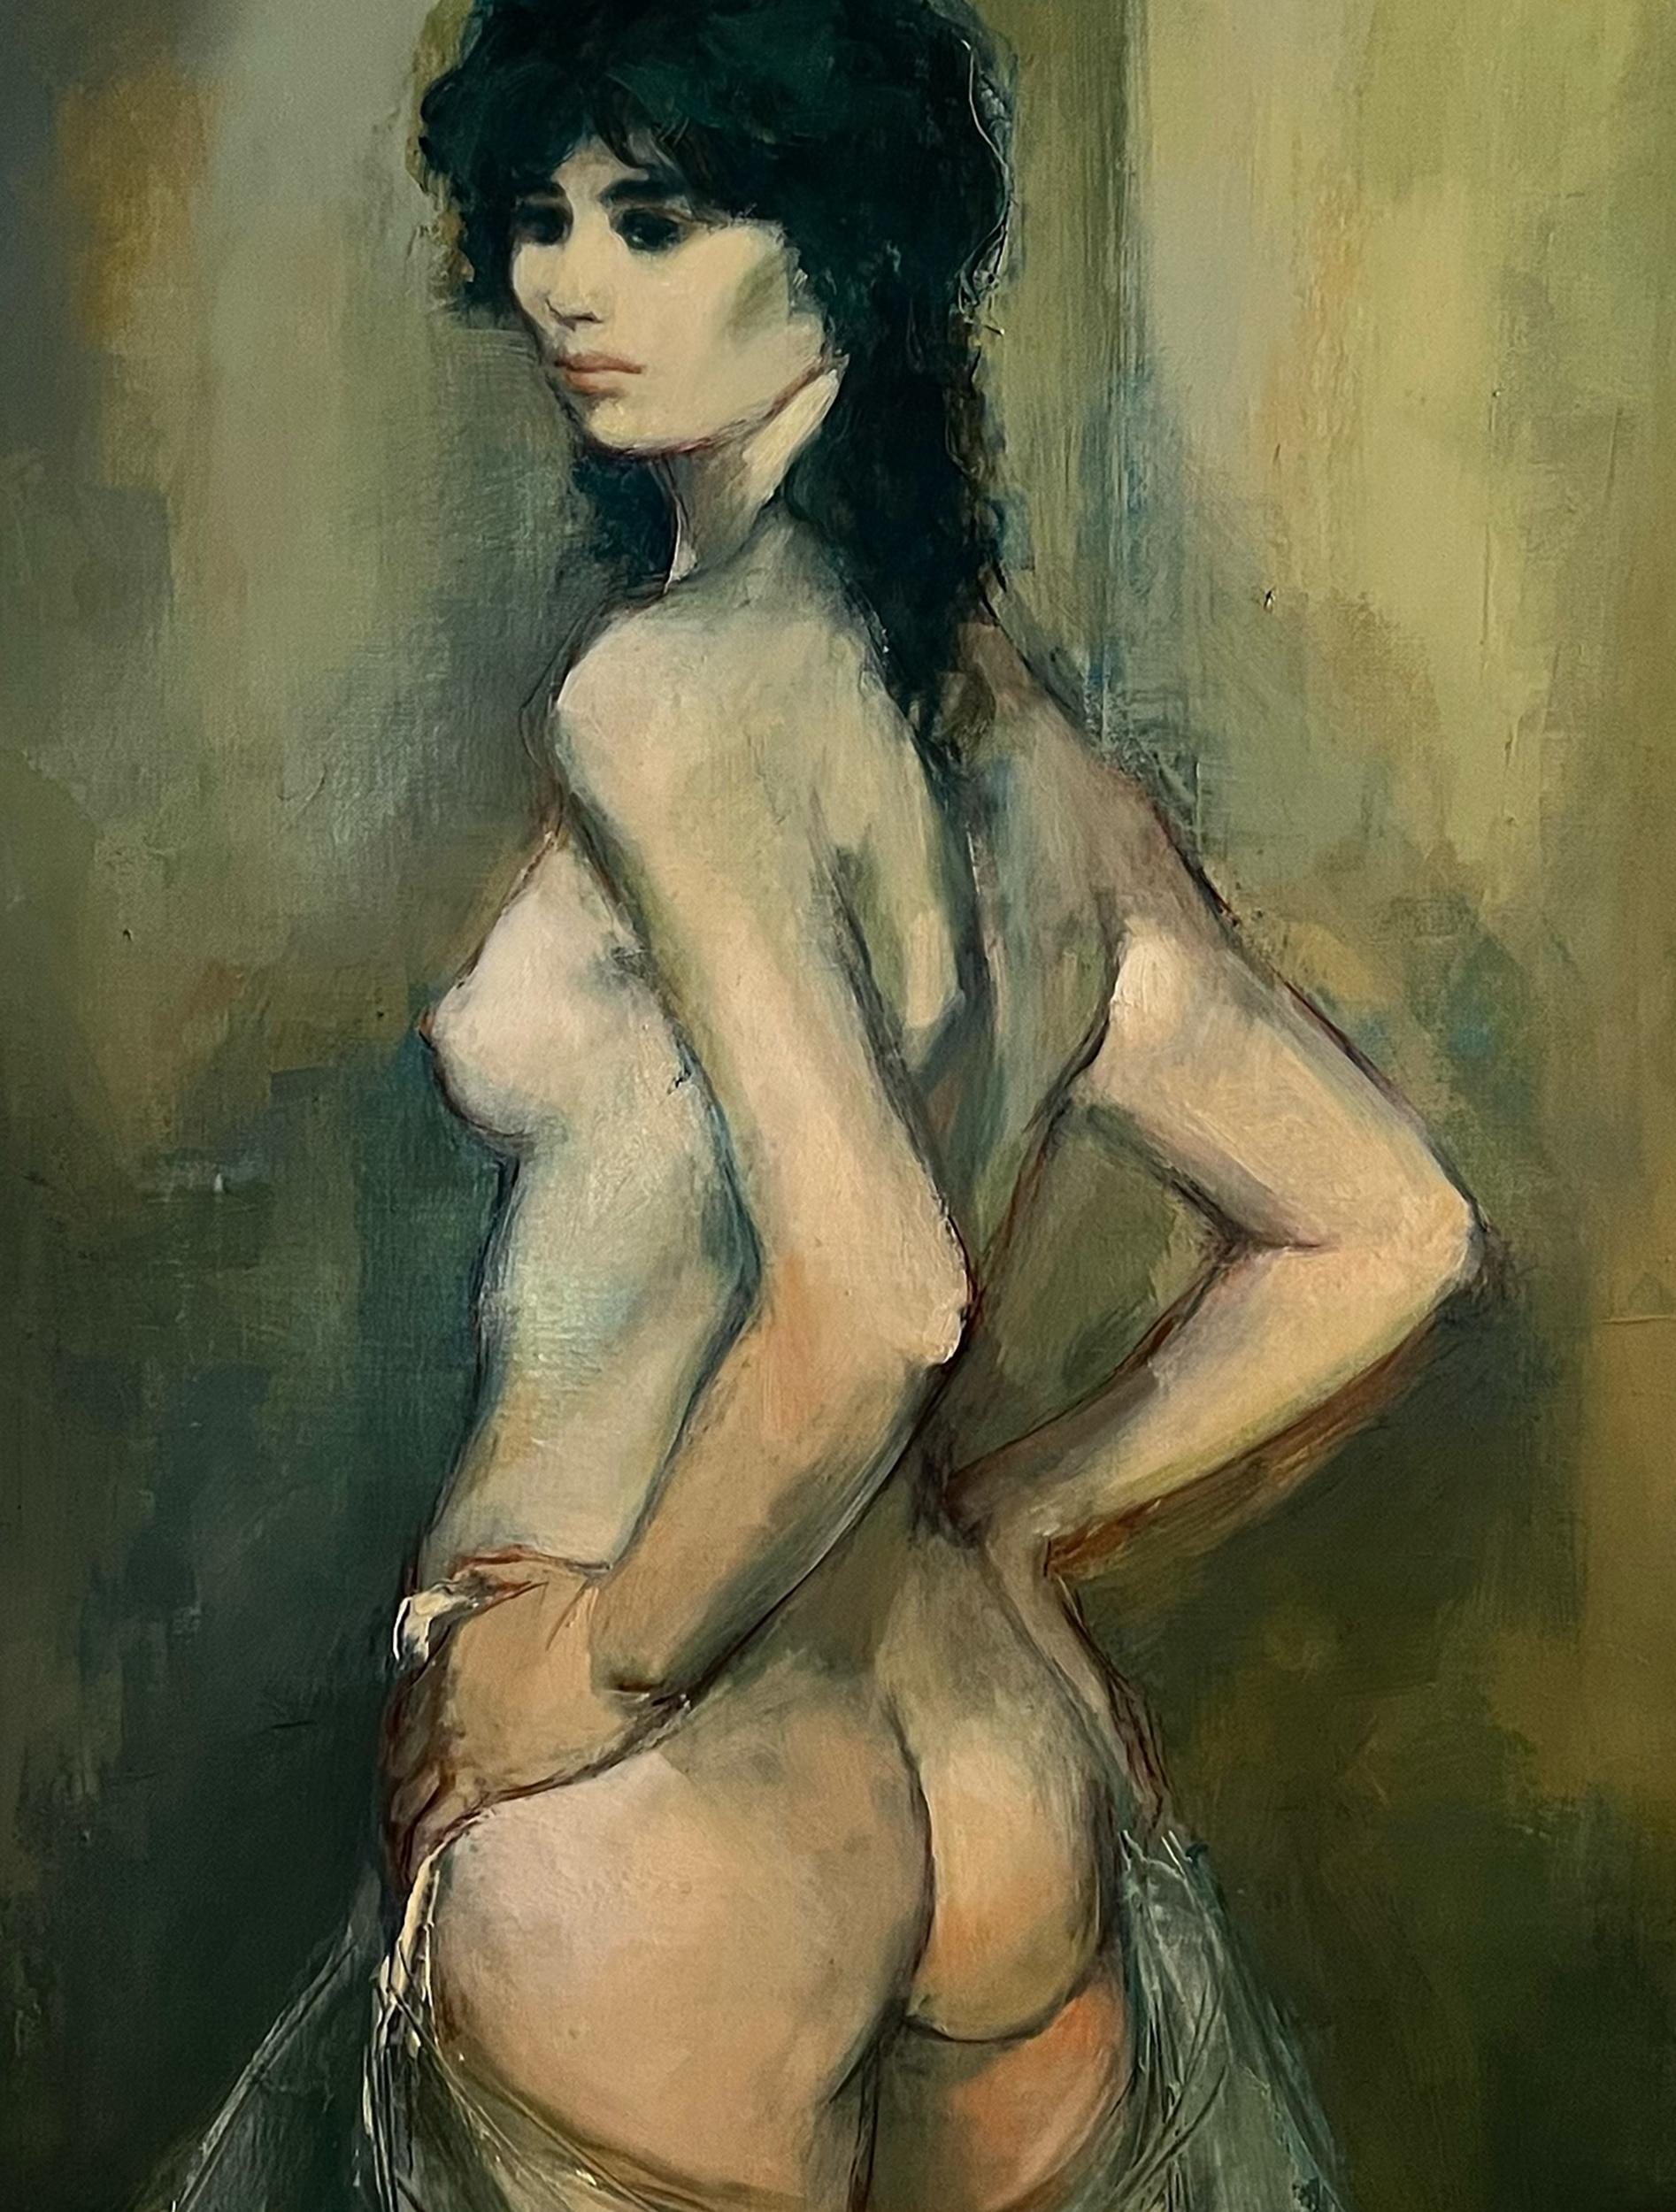 Jan de Ruth's Impressionist painting of a nude woman with her back to the viewer. She turns and looks over her shoulder, exposing her face and chest to us. The only garment she wears is a sheer drape of cloth held at her waist by her hands. This oil